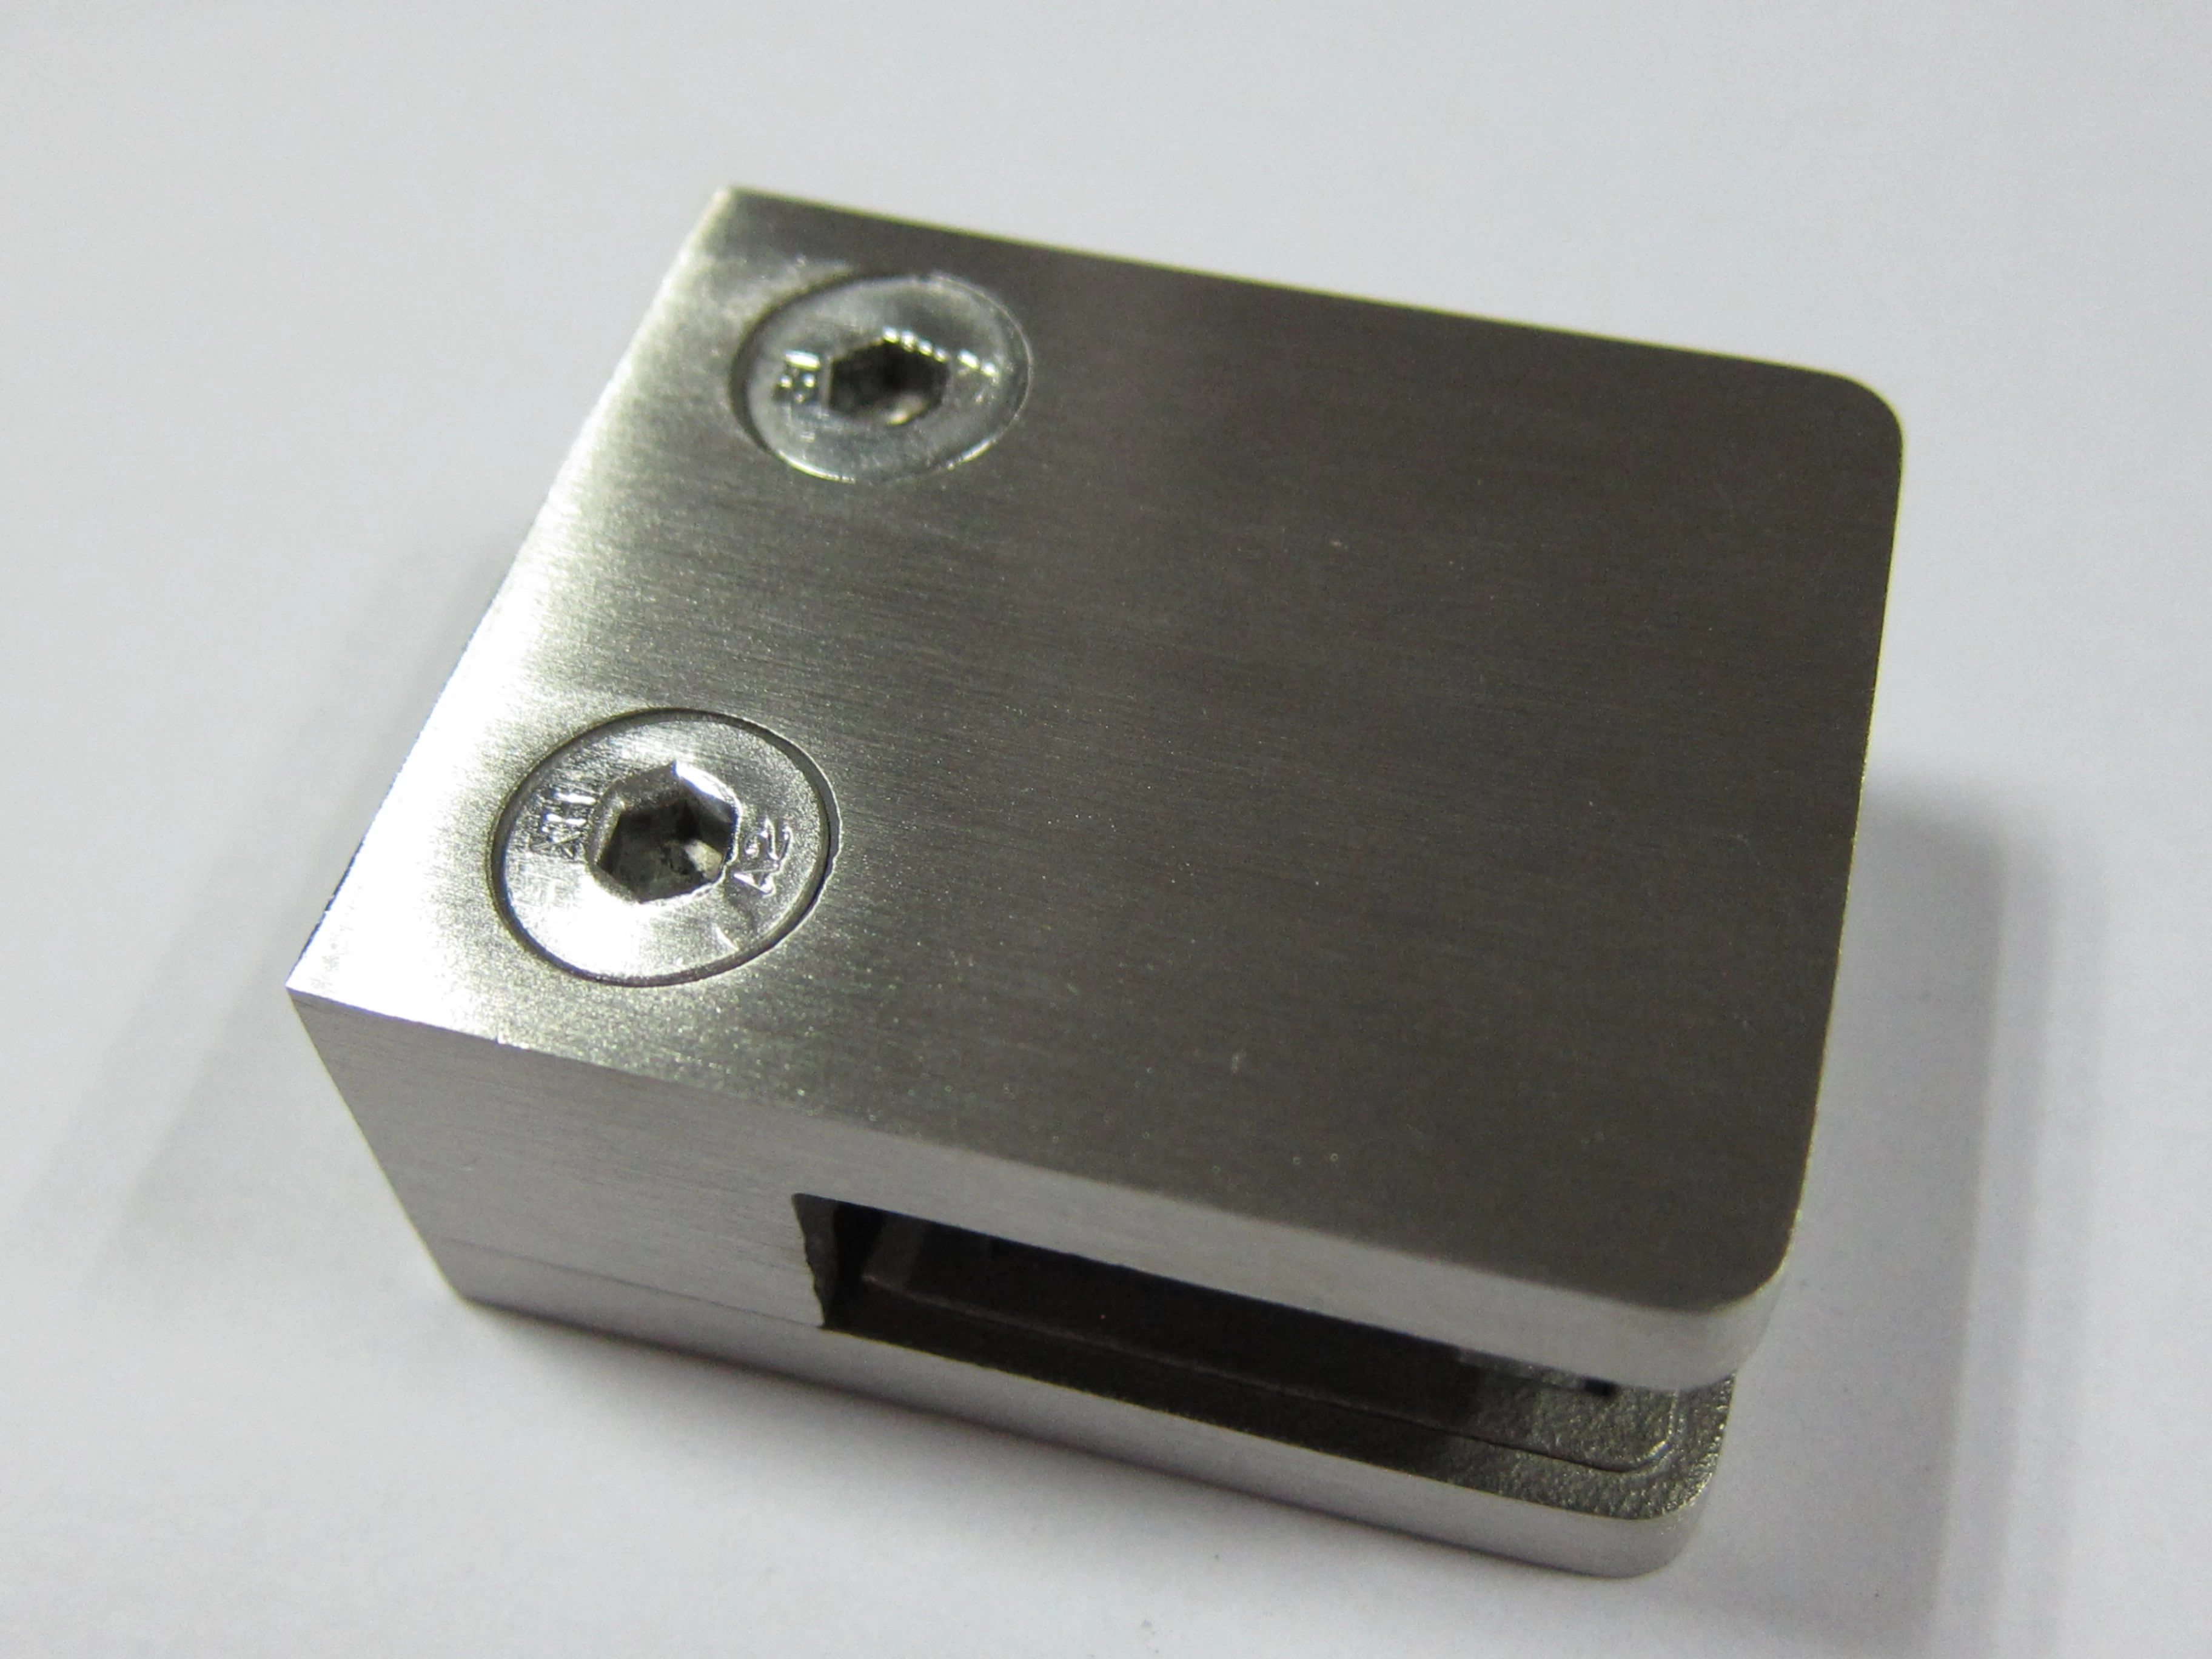 Square Glass Clamps with Flat back stainless steel 316 for Use With Square Tubing or Other Flat Surfaces